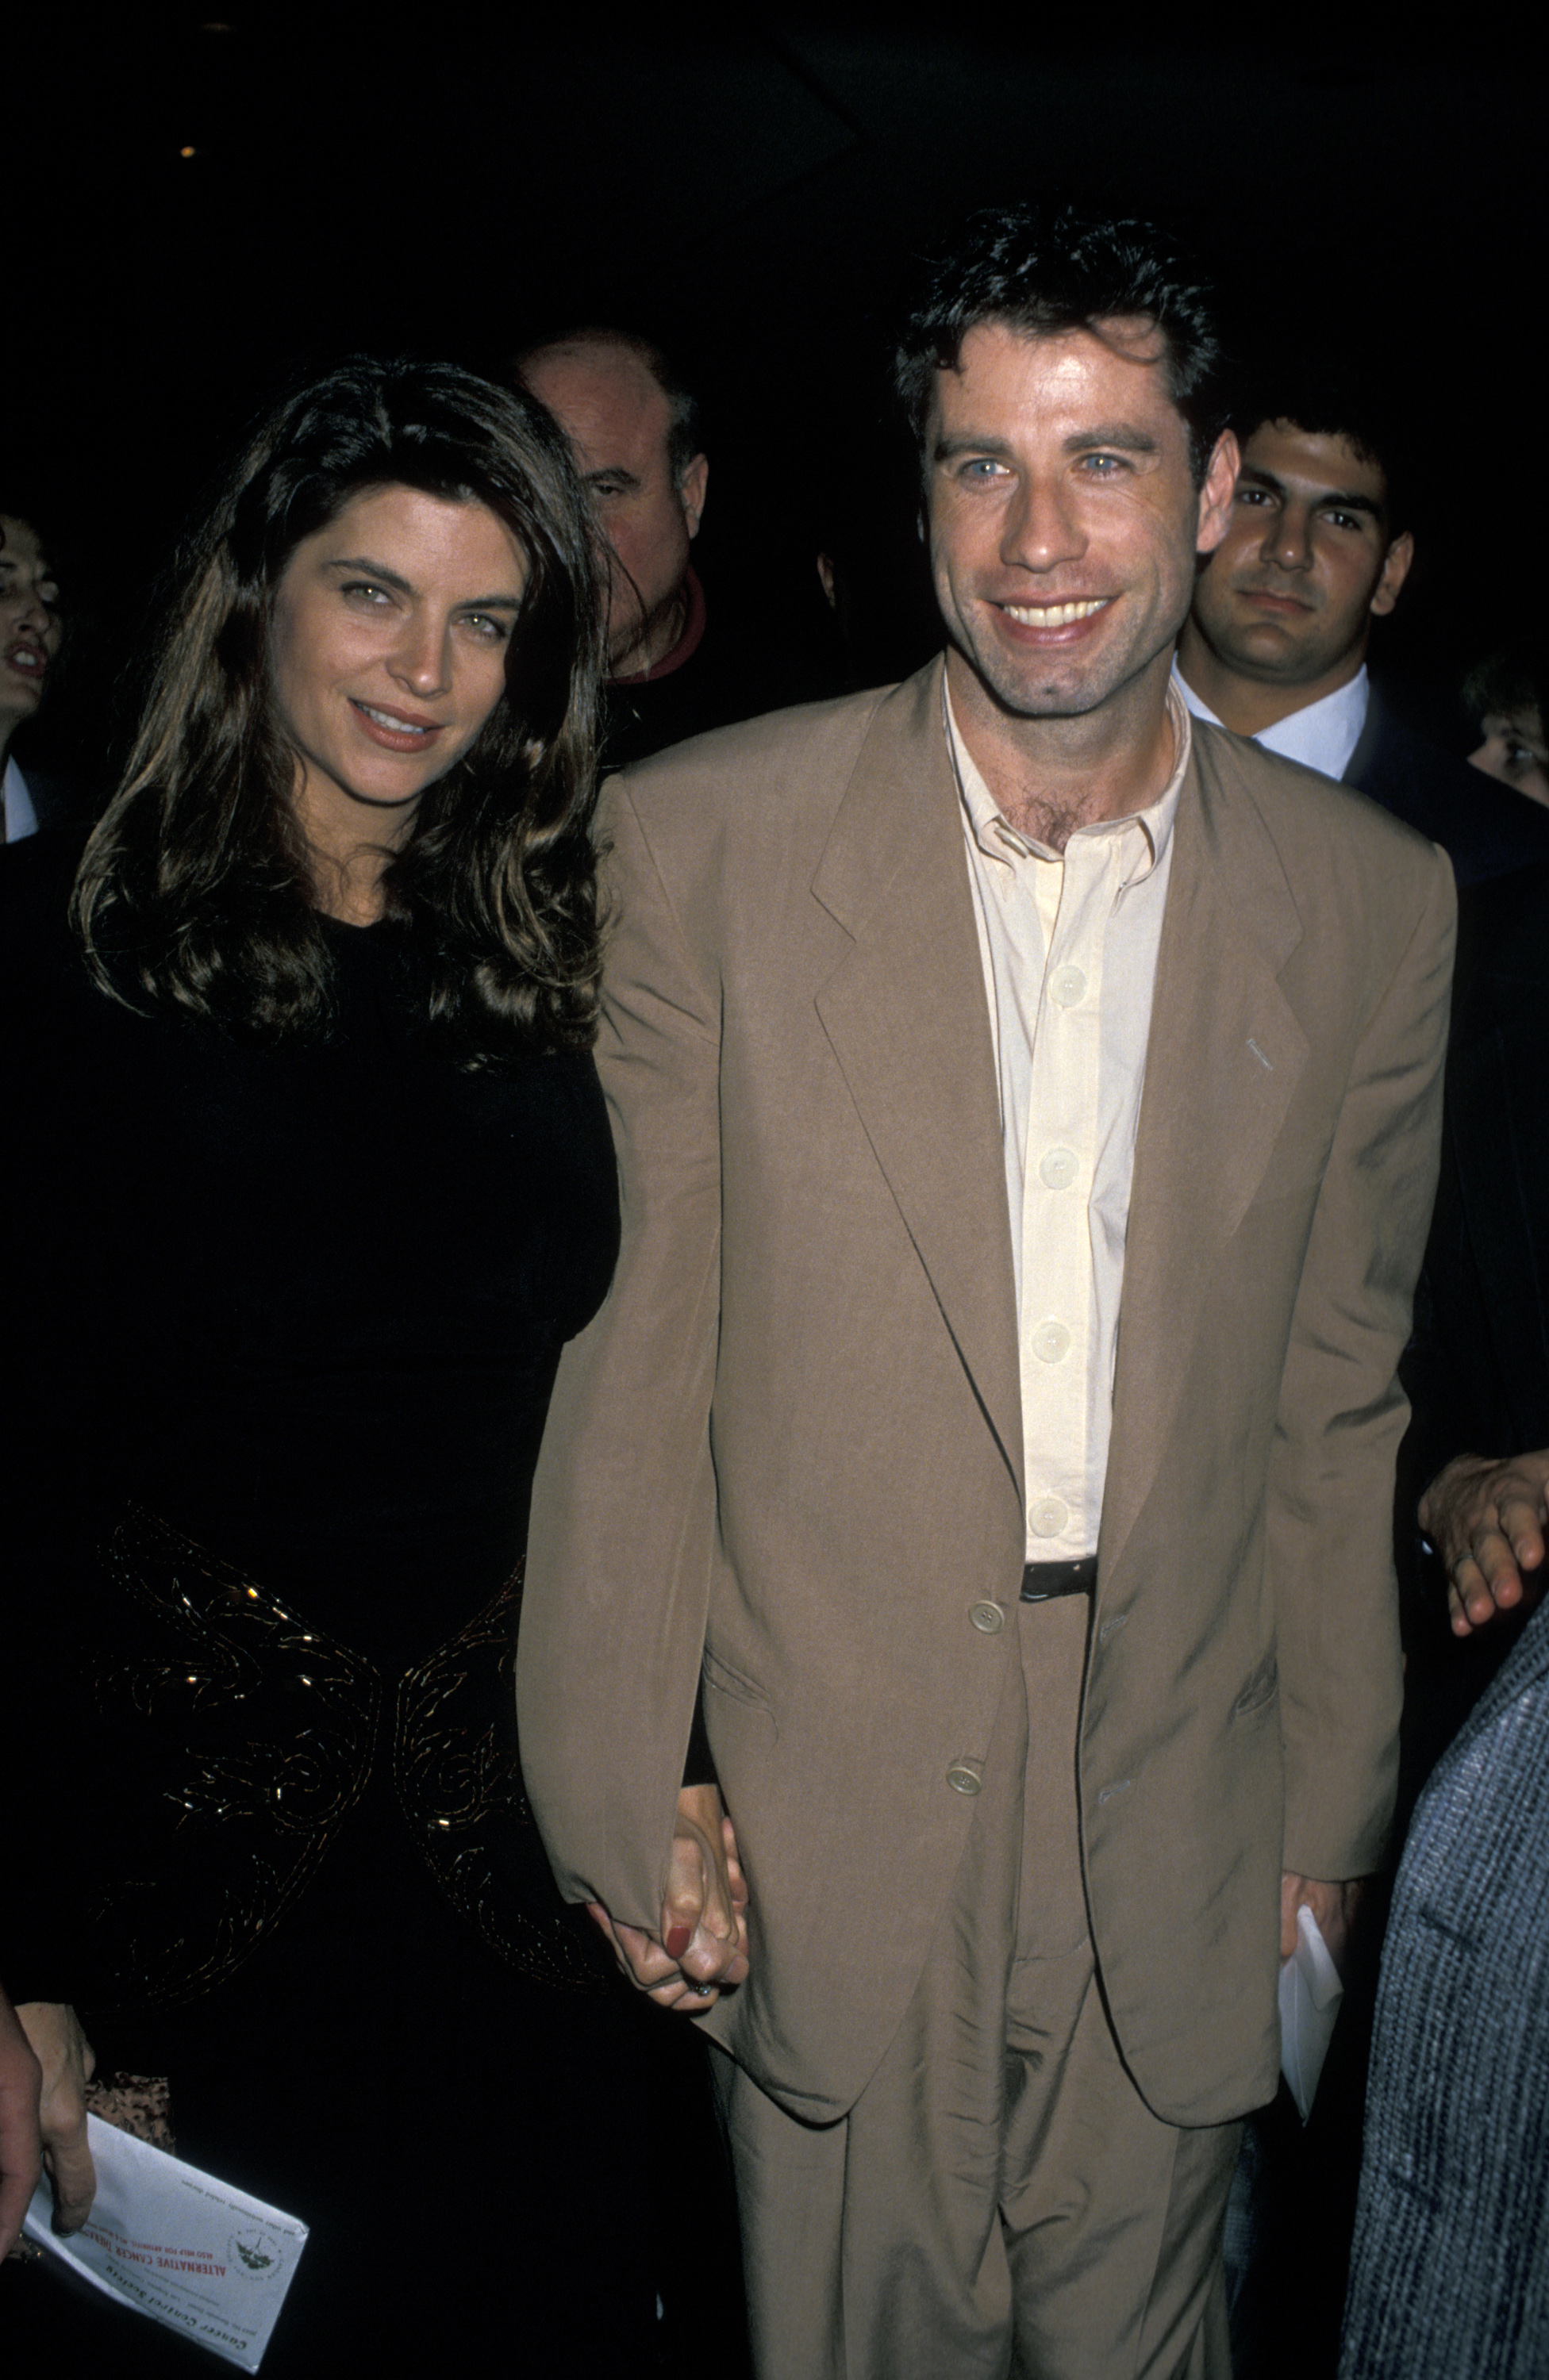 Kirstie Alley and John Travolta in Los Angeles on October 12, 1989 | Source: Getty Images